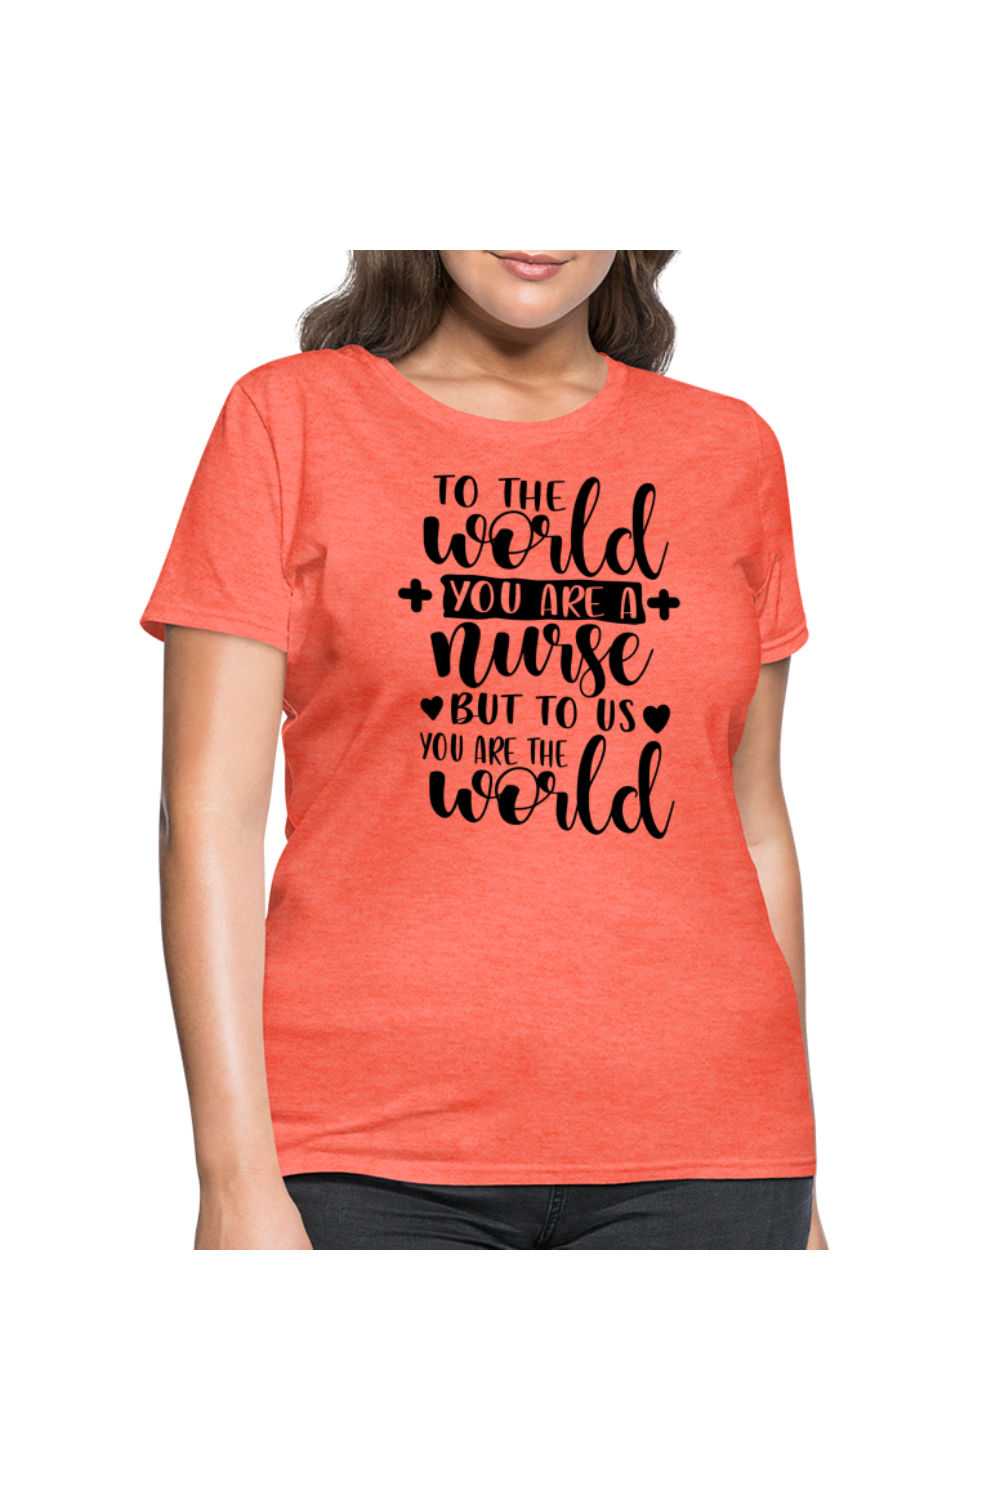 To The World Women's Nurse T-Shirt - heather coral